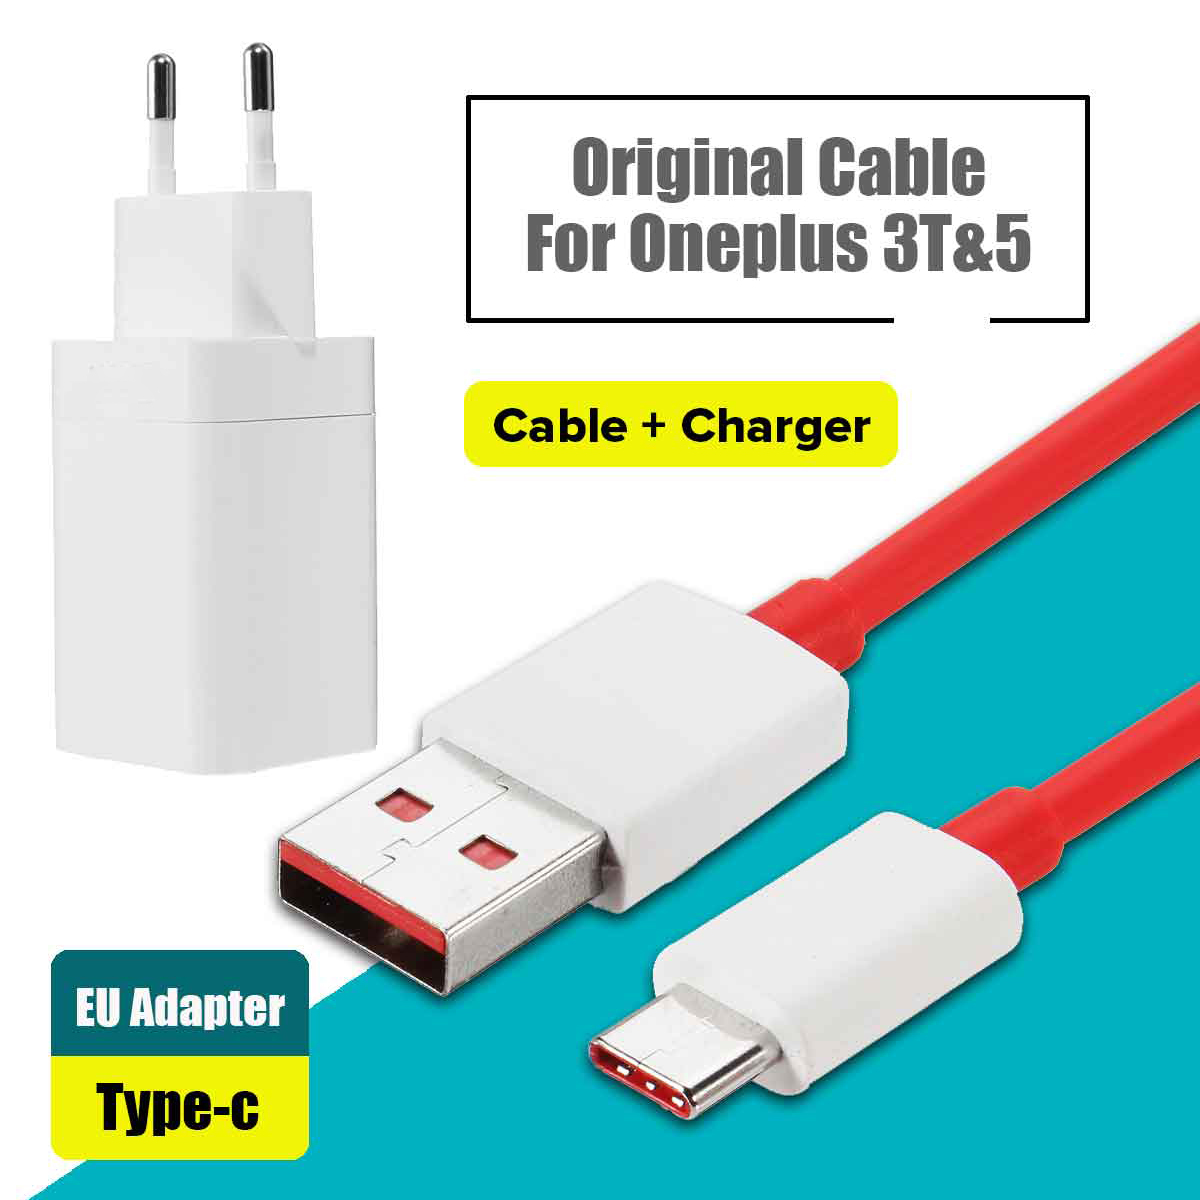 5V 4A Original Fast Phone Charger EU Adapter Type-C Cable For ONEPLUS 3T / 5